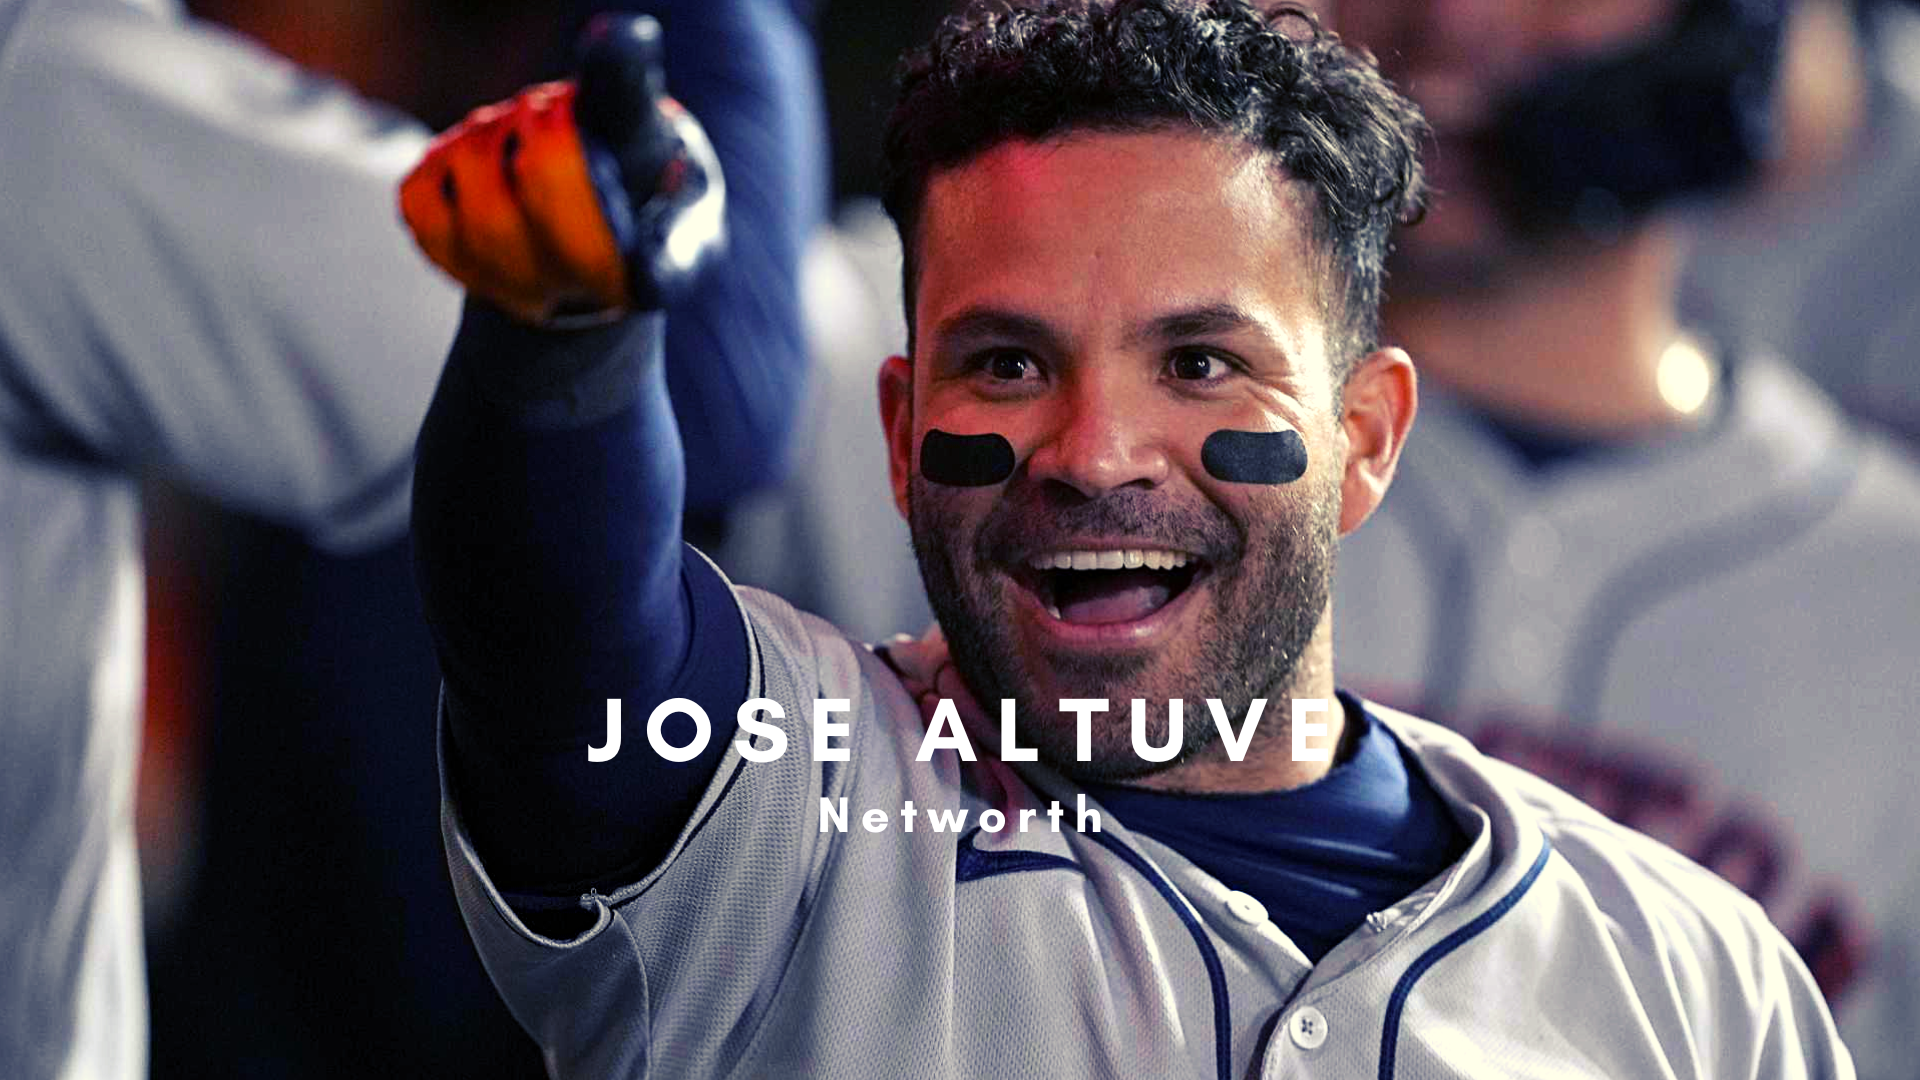 Jose Altuve's Profile: Age, height, contract, wife and net worth